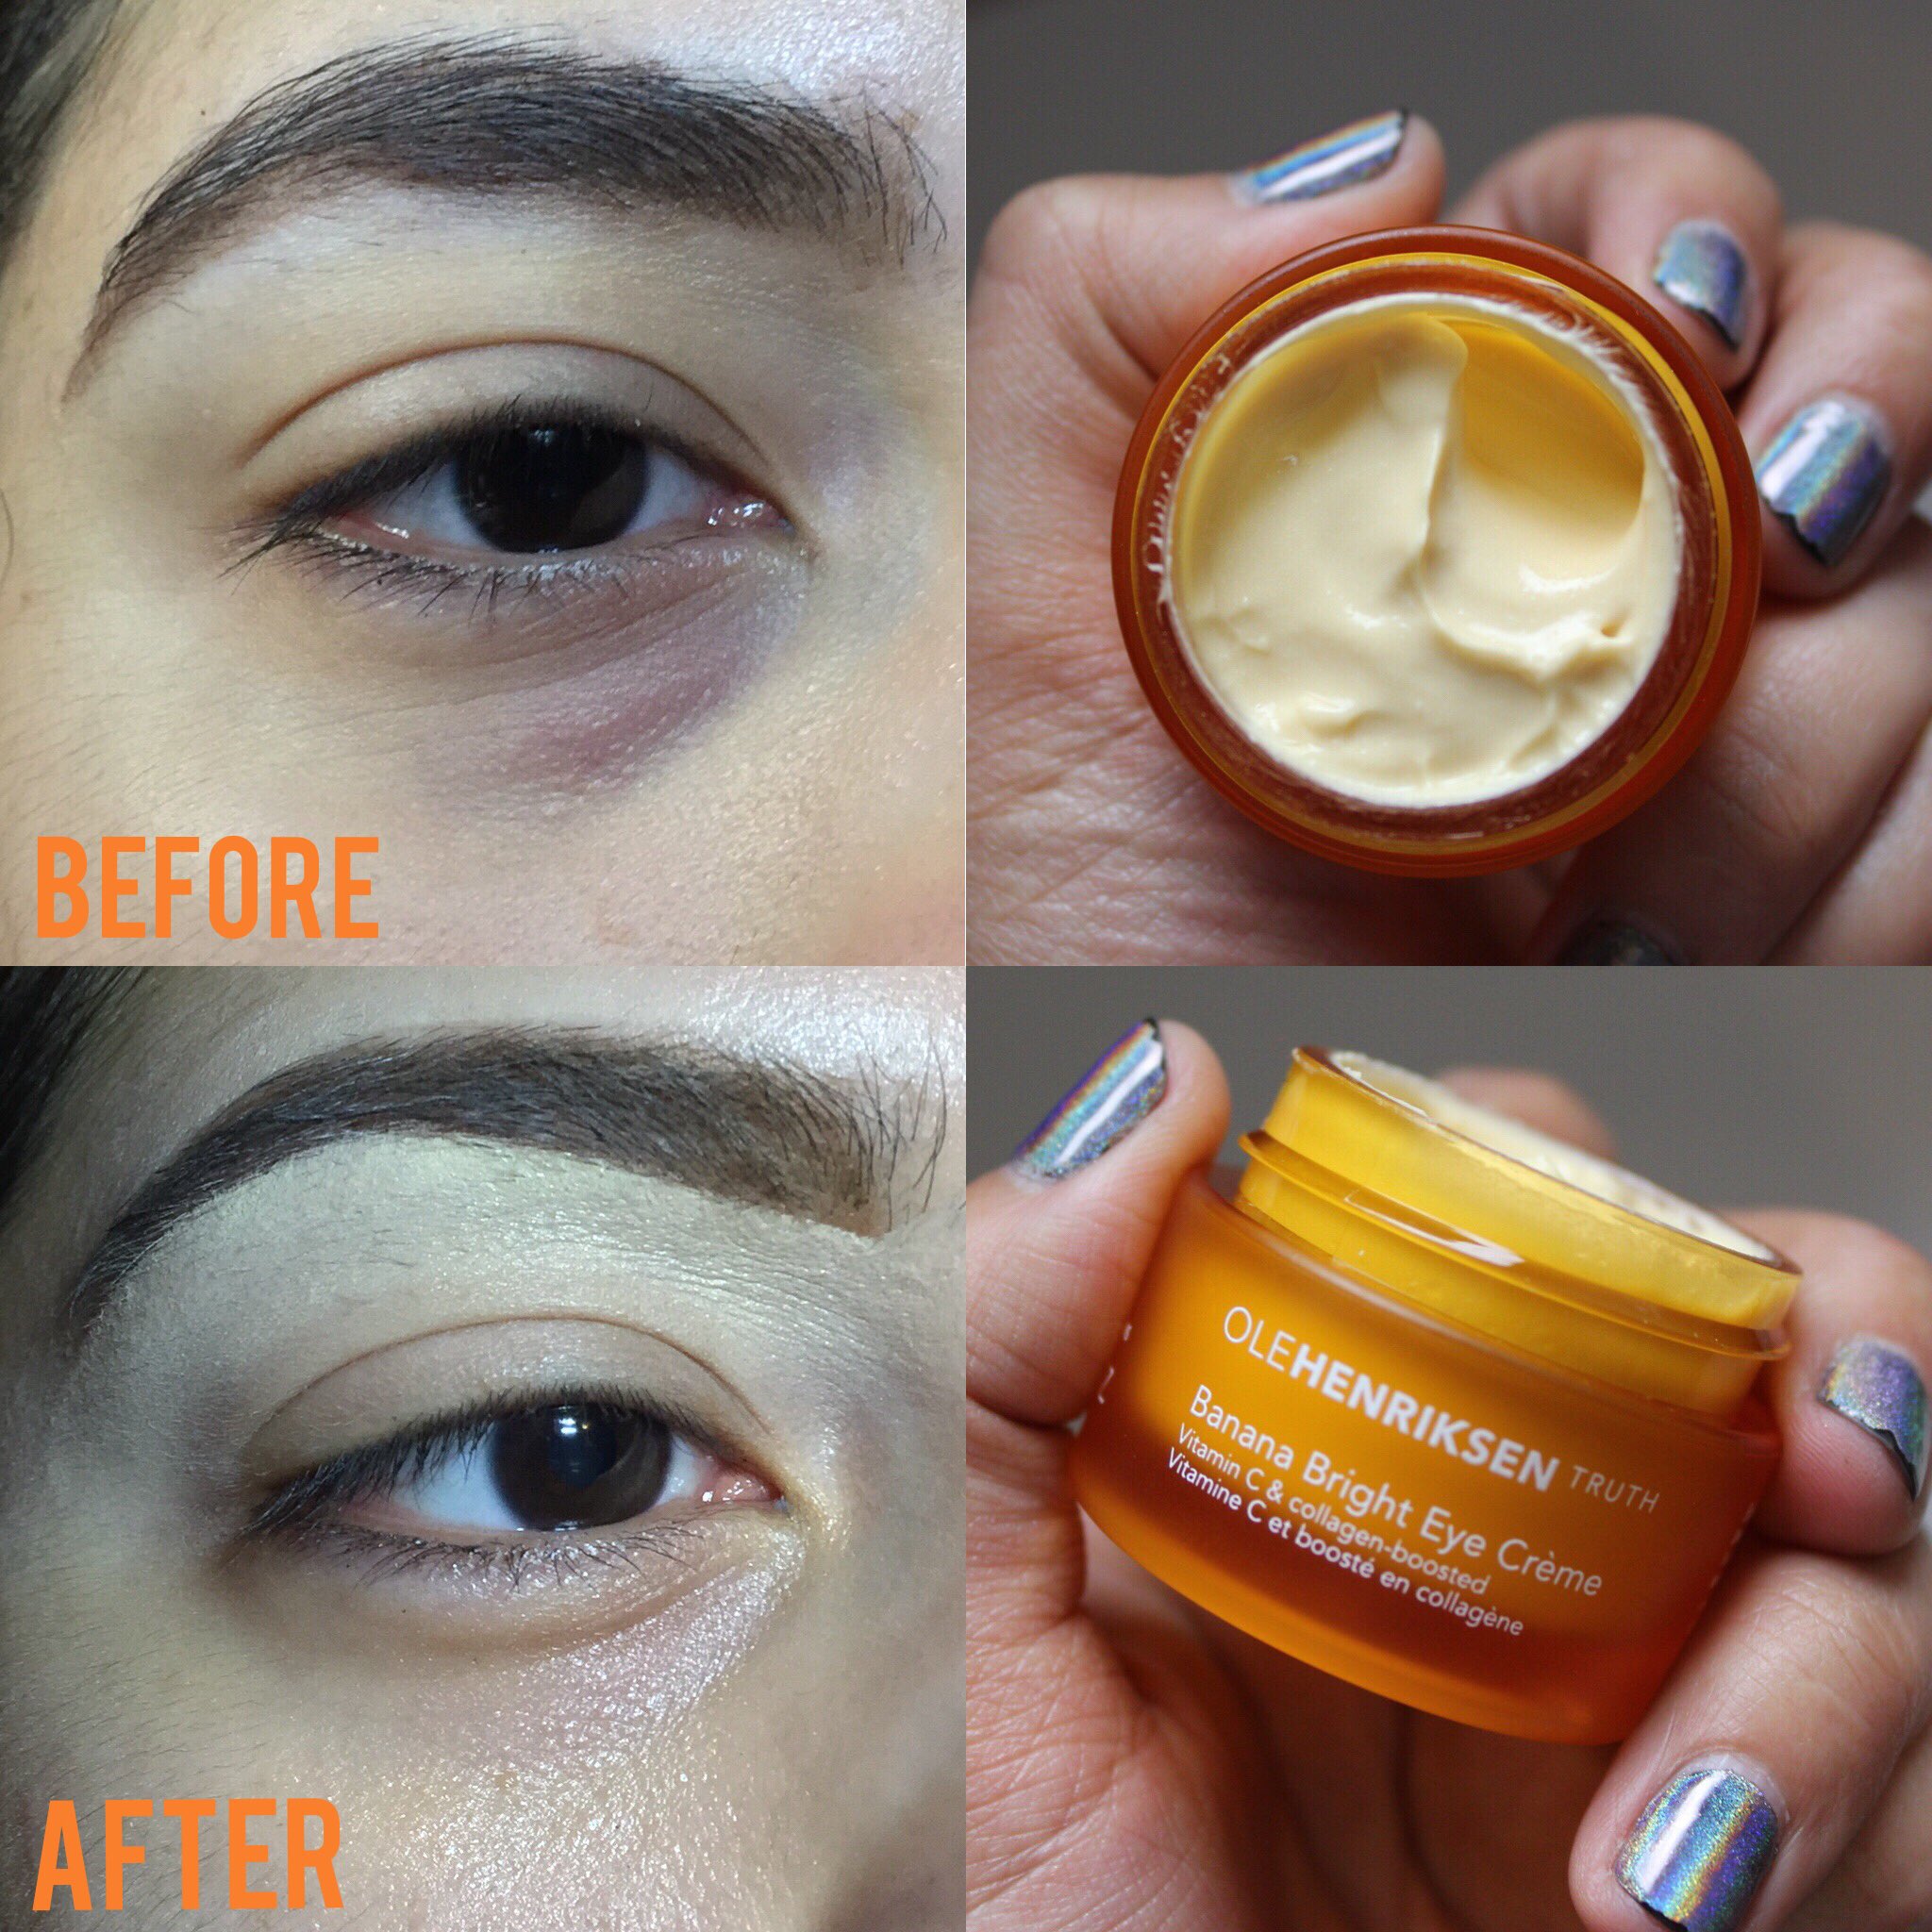 Lisa Moreno on X: By far the best eye cream I have tried! Obsessed with @ OleHenriksen Banana Bright Eye Cream. I received this complimentary from  @Influenster @olehenriksen @Influenster #bananabright #brightaway  #complimentary #contest